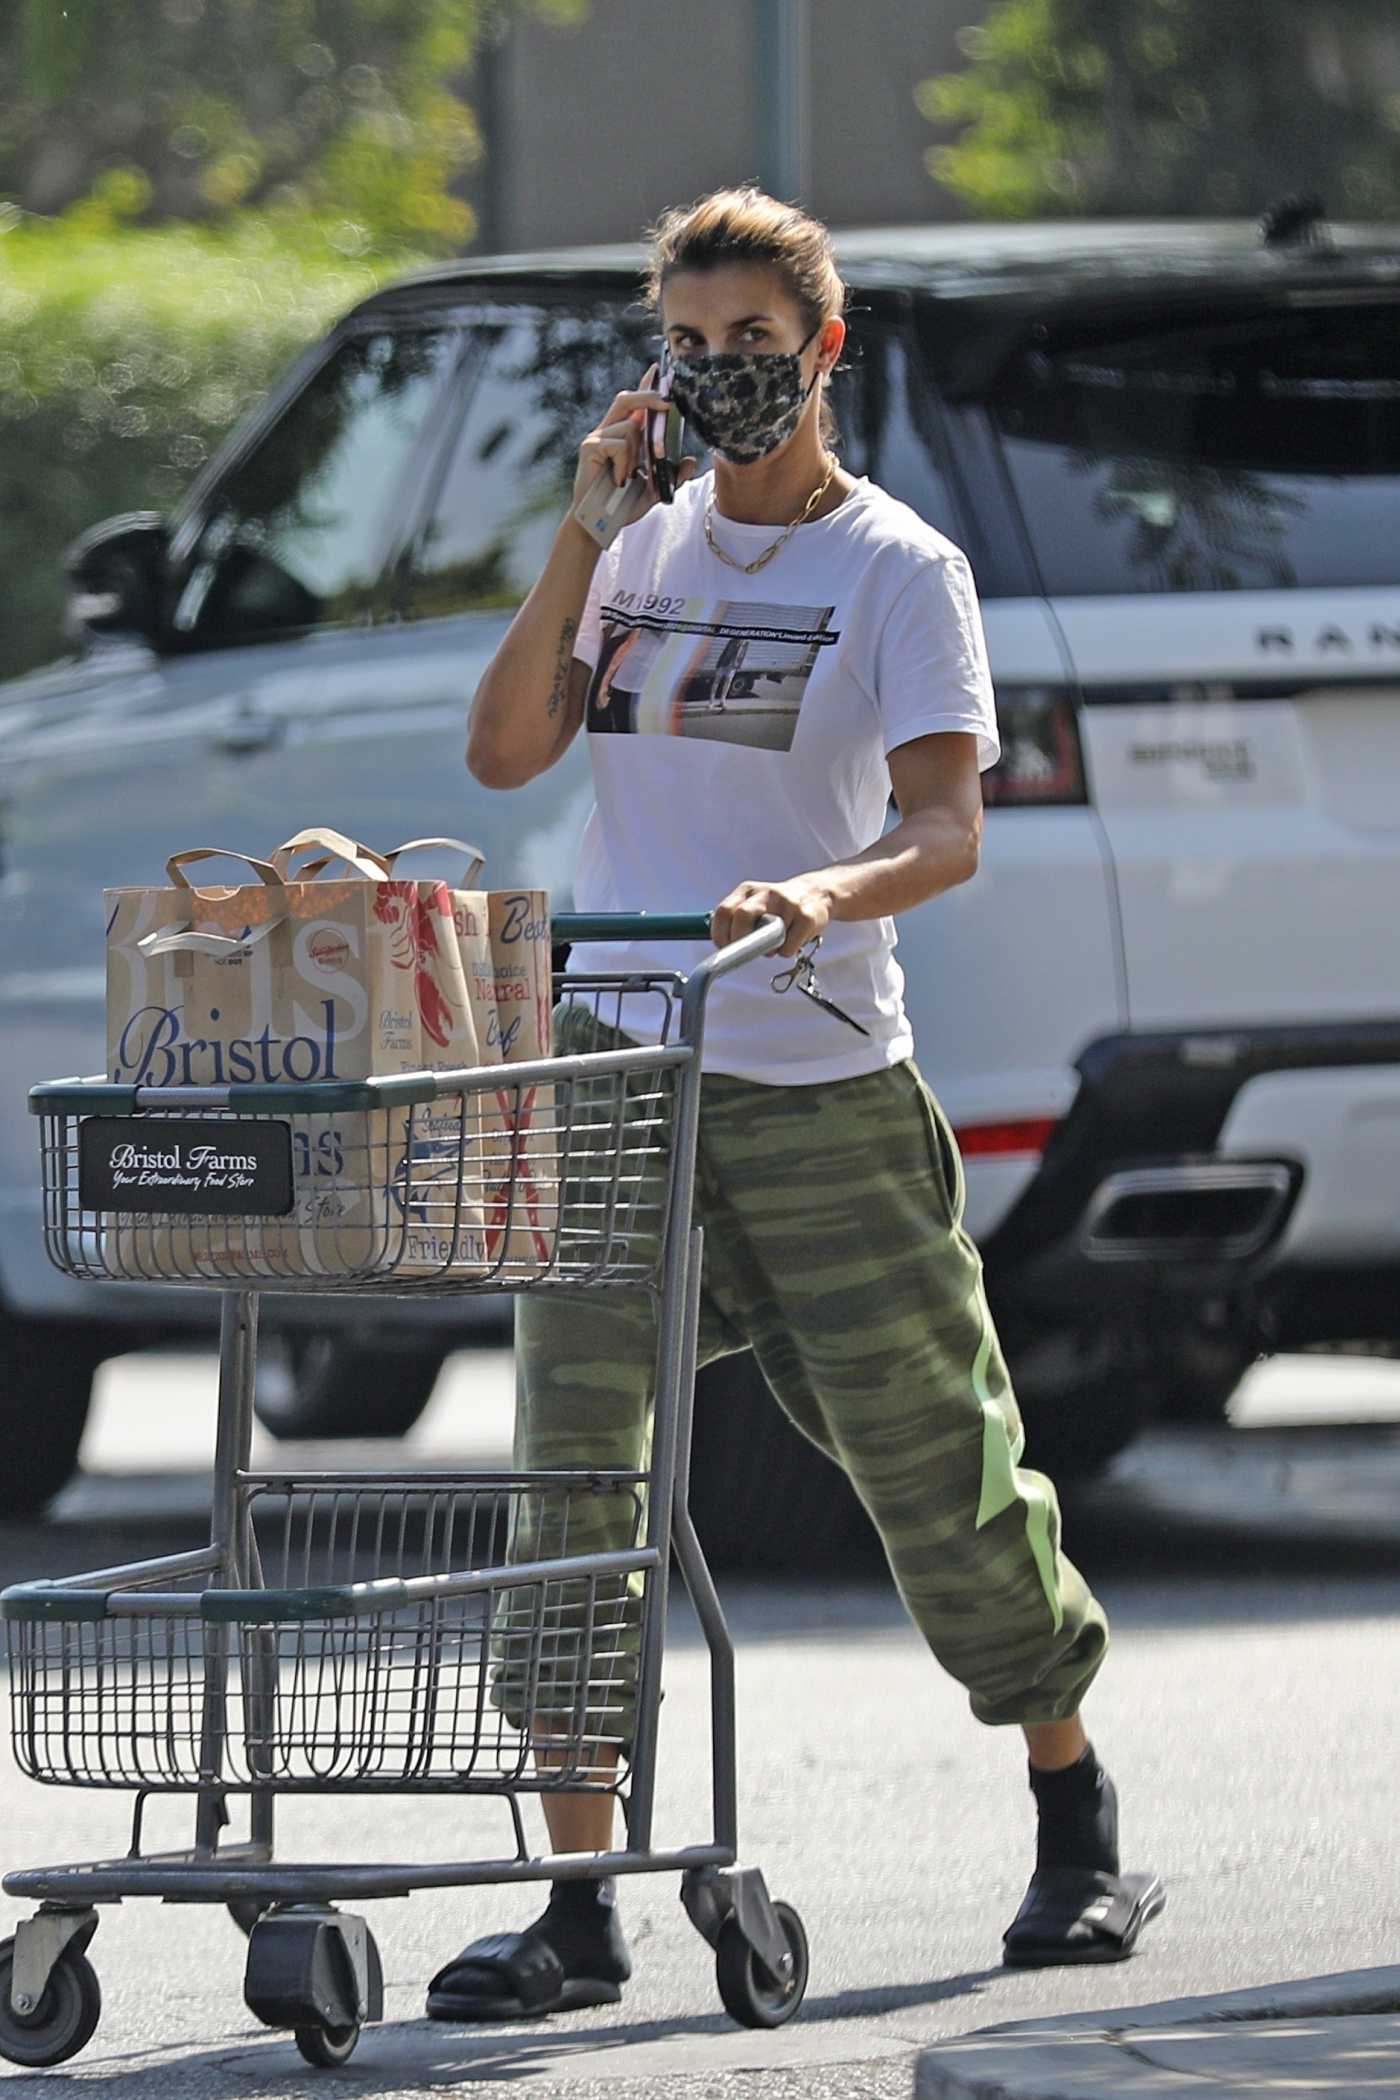 Elisabetta Canalis in a Camo Pants Goes Grocery Shopping at Bristol Farms in West Hollywood 09/25/2020